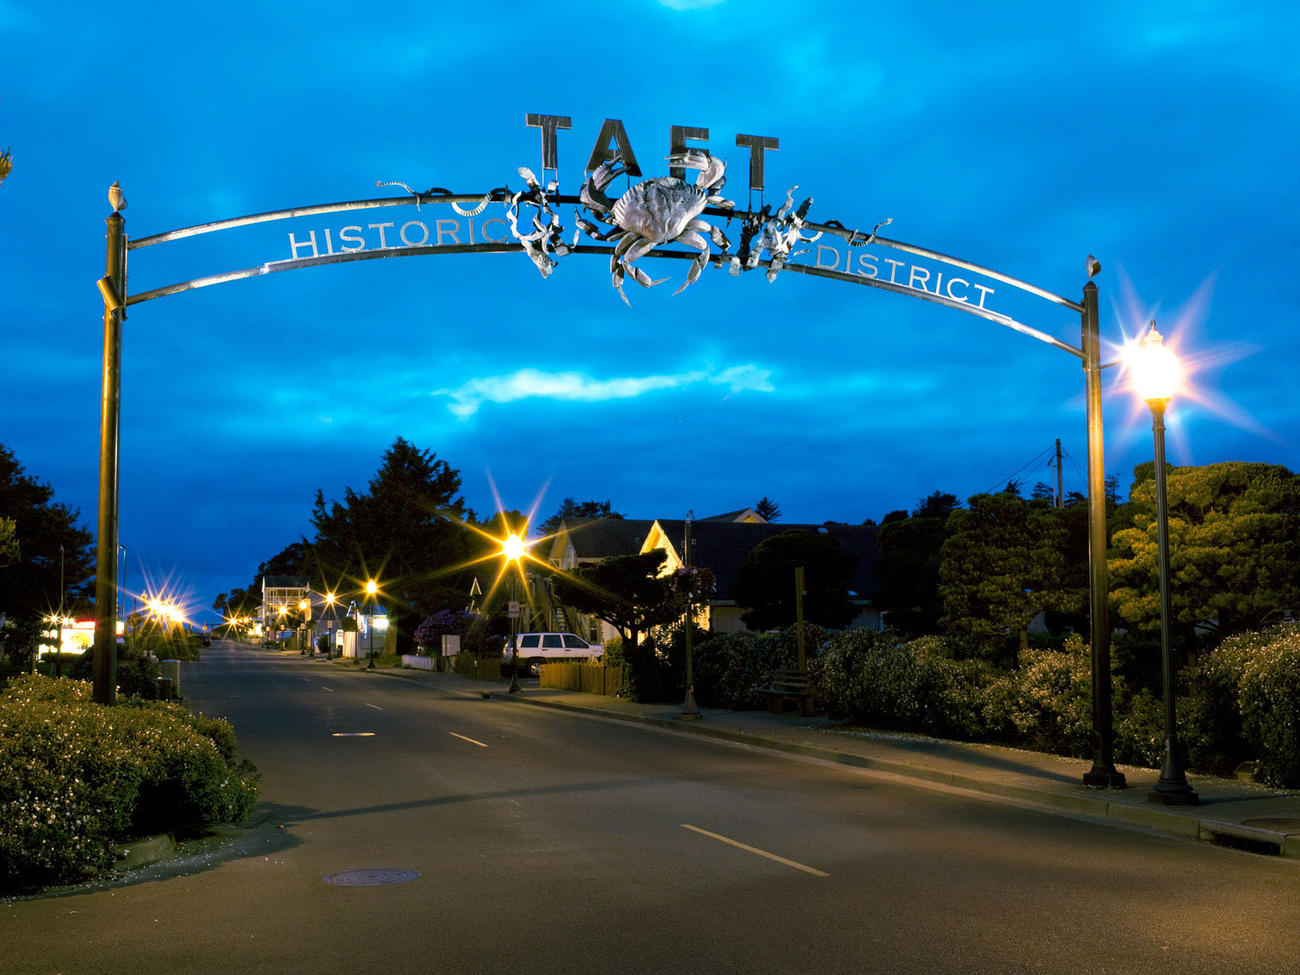 One Perfect Day in Lincoln City, OR: The Taft District